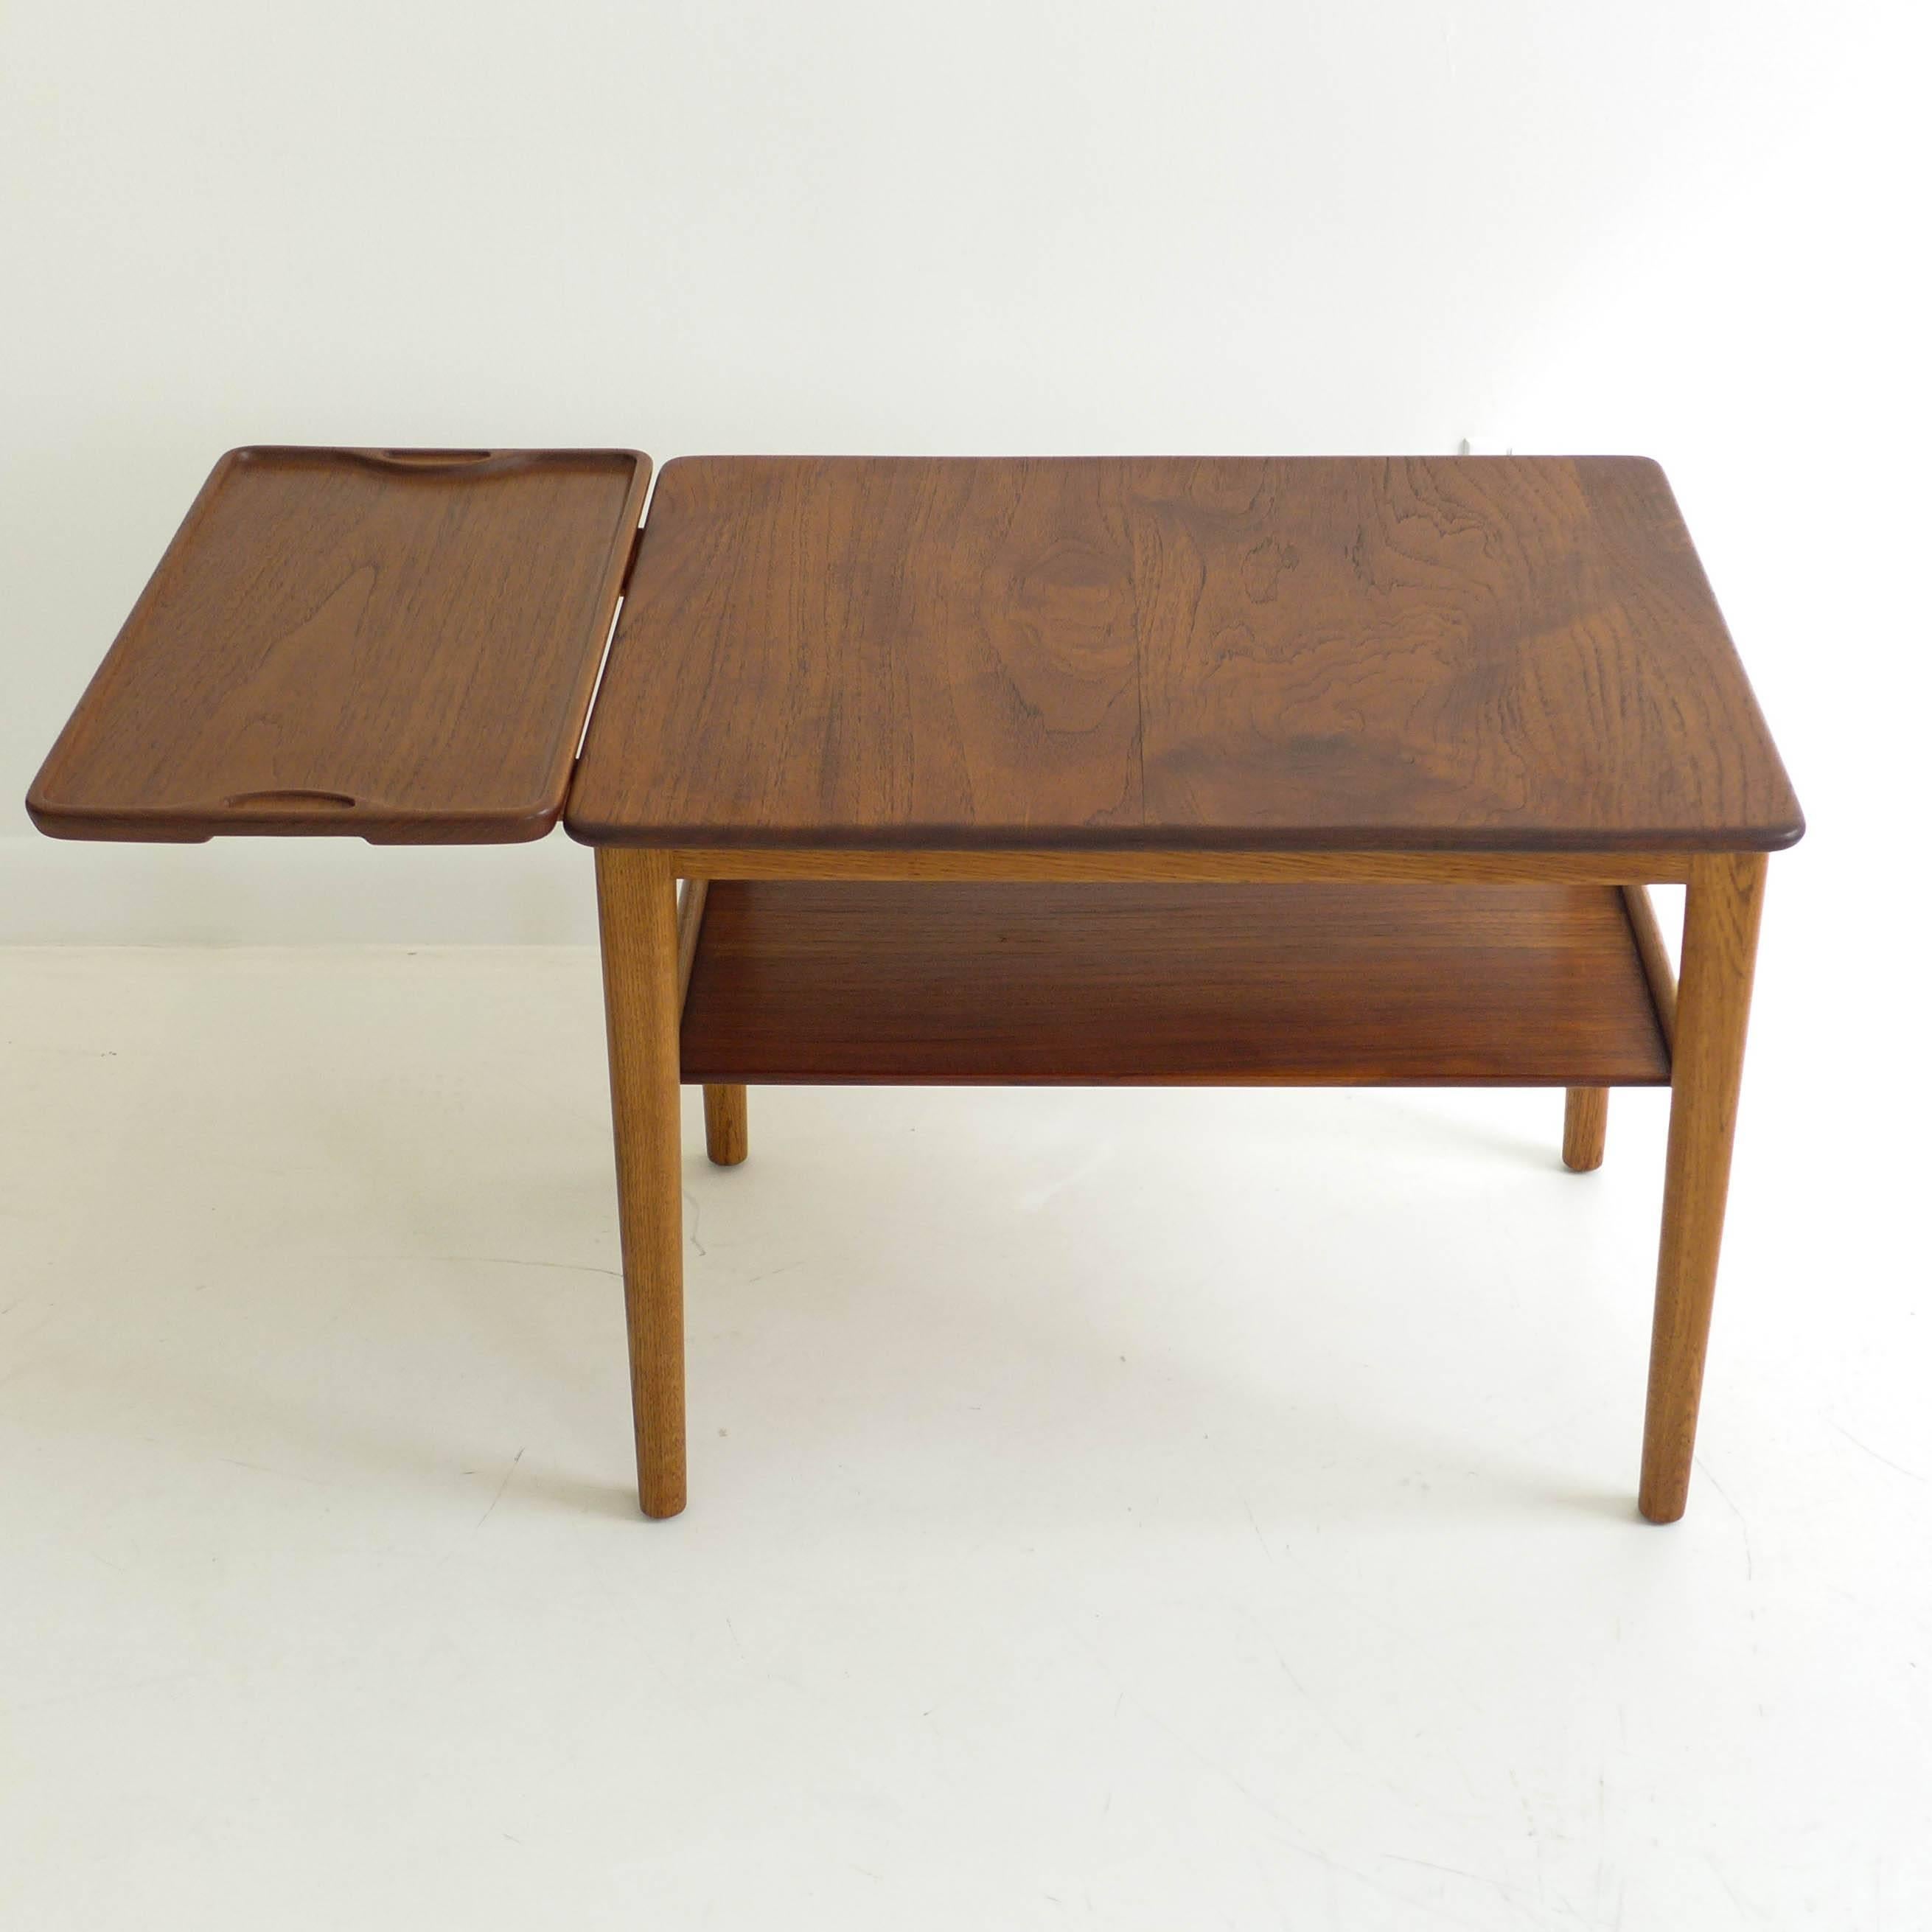 Side table or serving table with removable and mountable tray. Solid teak top, tray, and shelf with solid oak framing. Designed by Hans Wegner and produced by Johannes Hansen, circa 1950s. A rare form with the tray. Branded marks 